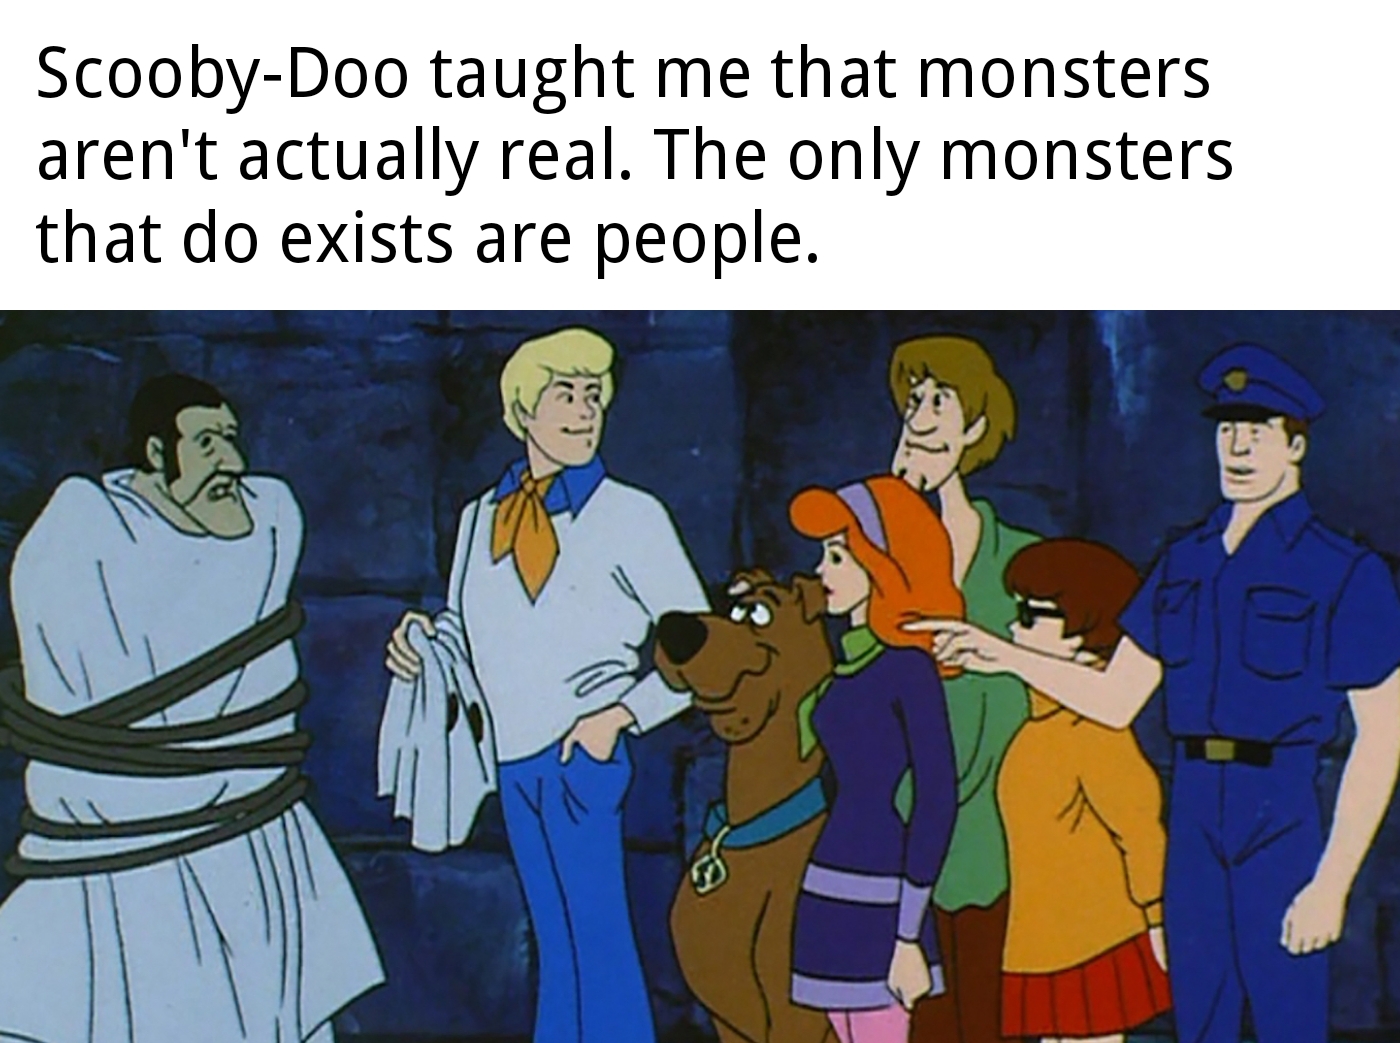 dank memes  - scooby doo where are you - ScoobyDoo taught me that monsters aren't actually real. The only monsters that do exists are people.